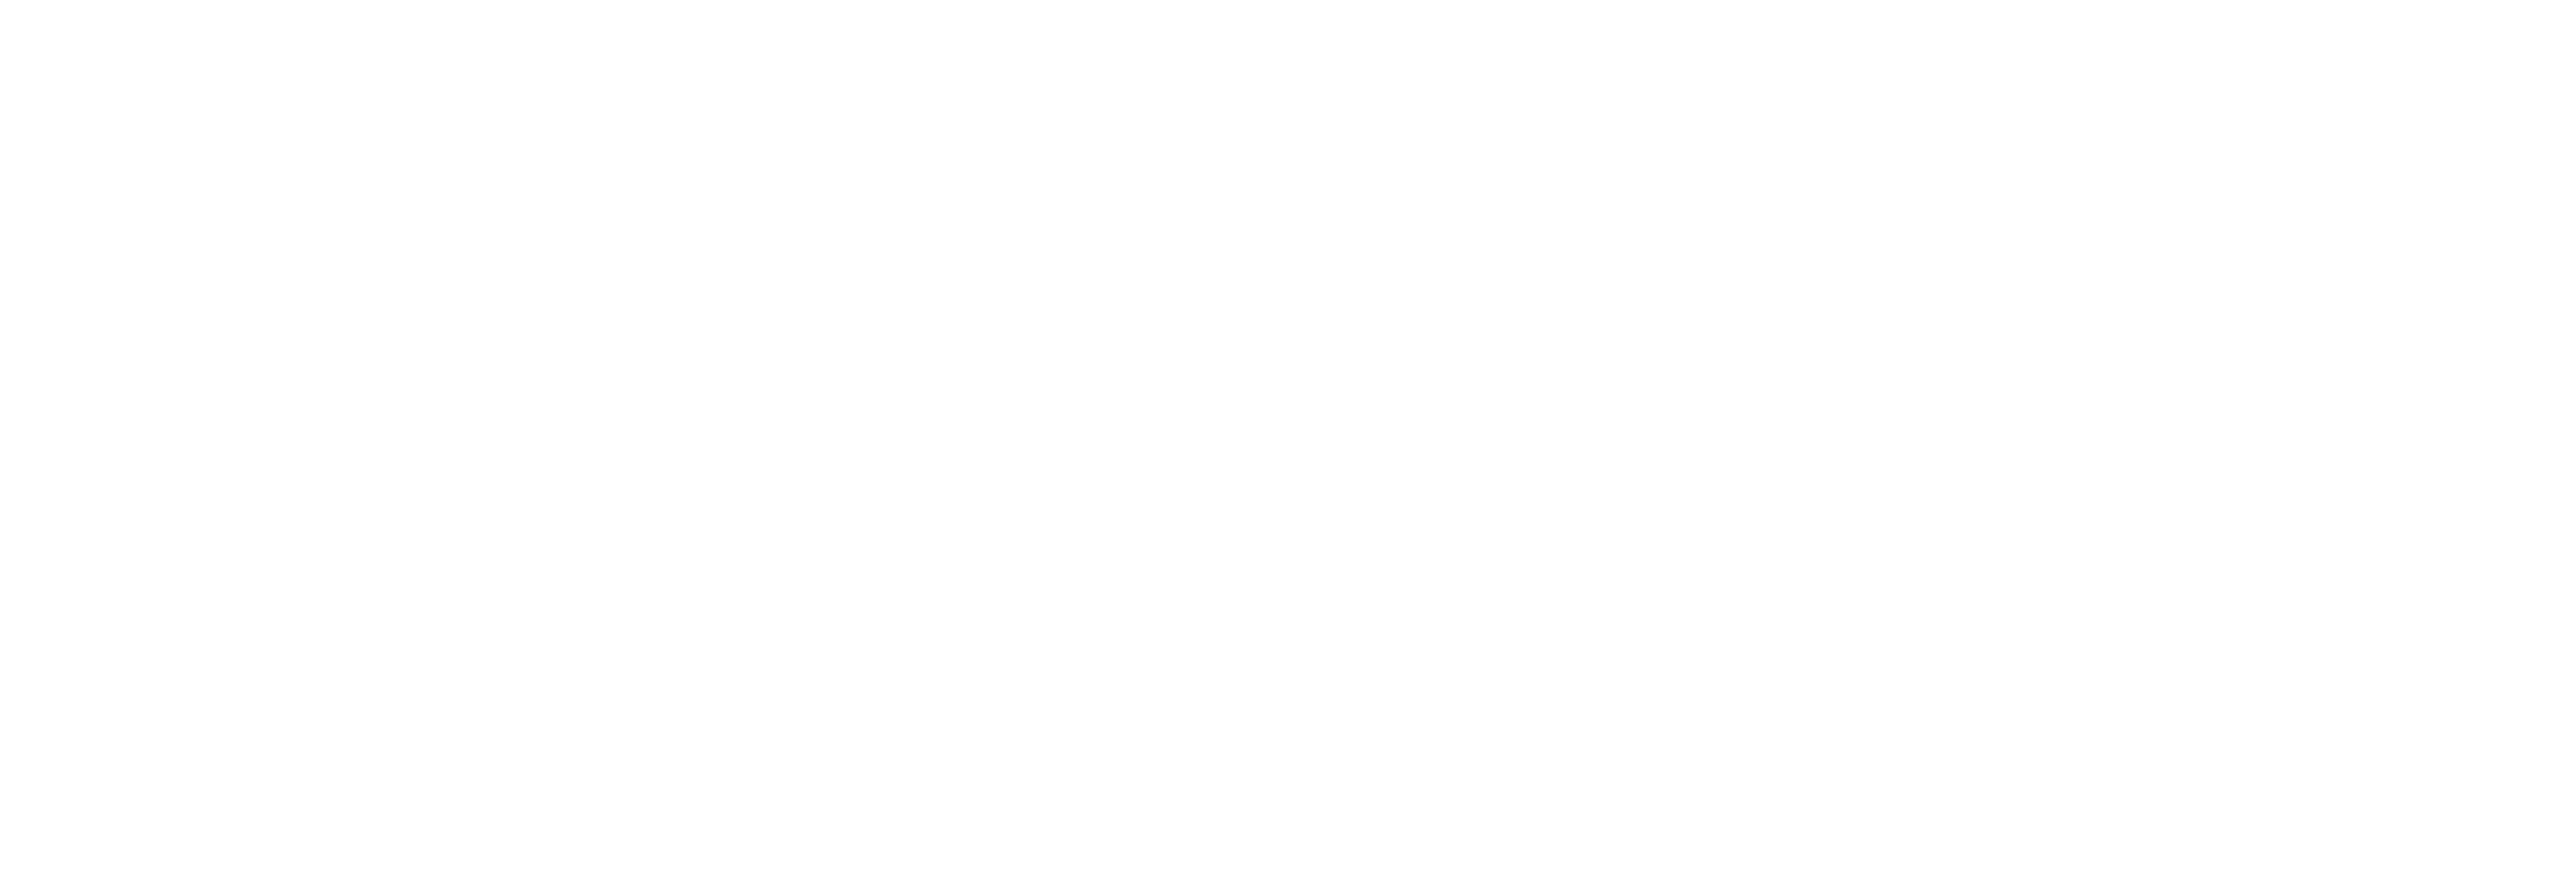 Food Nutrition and Packaging Sciences logo in white